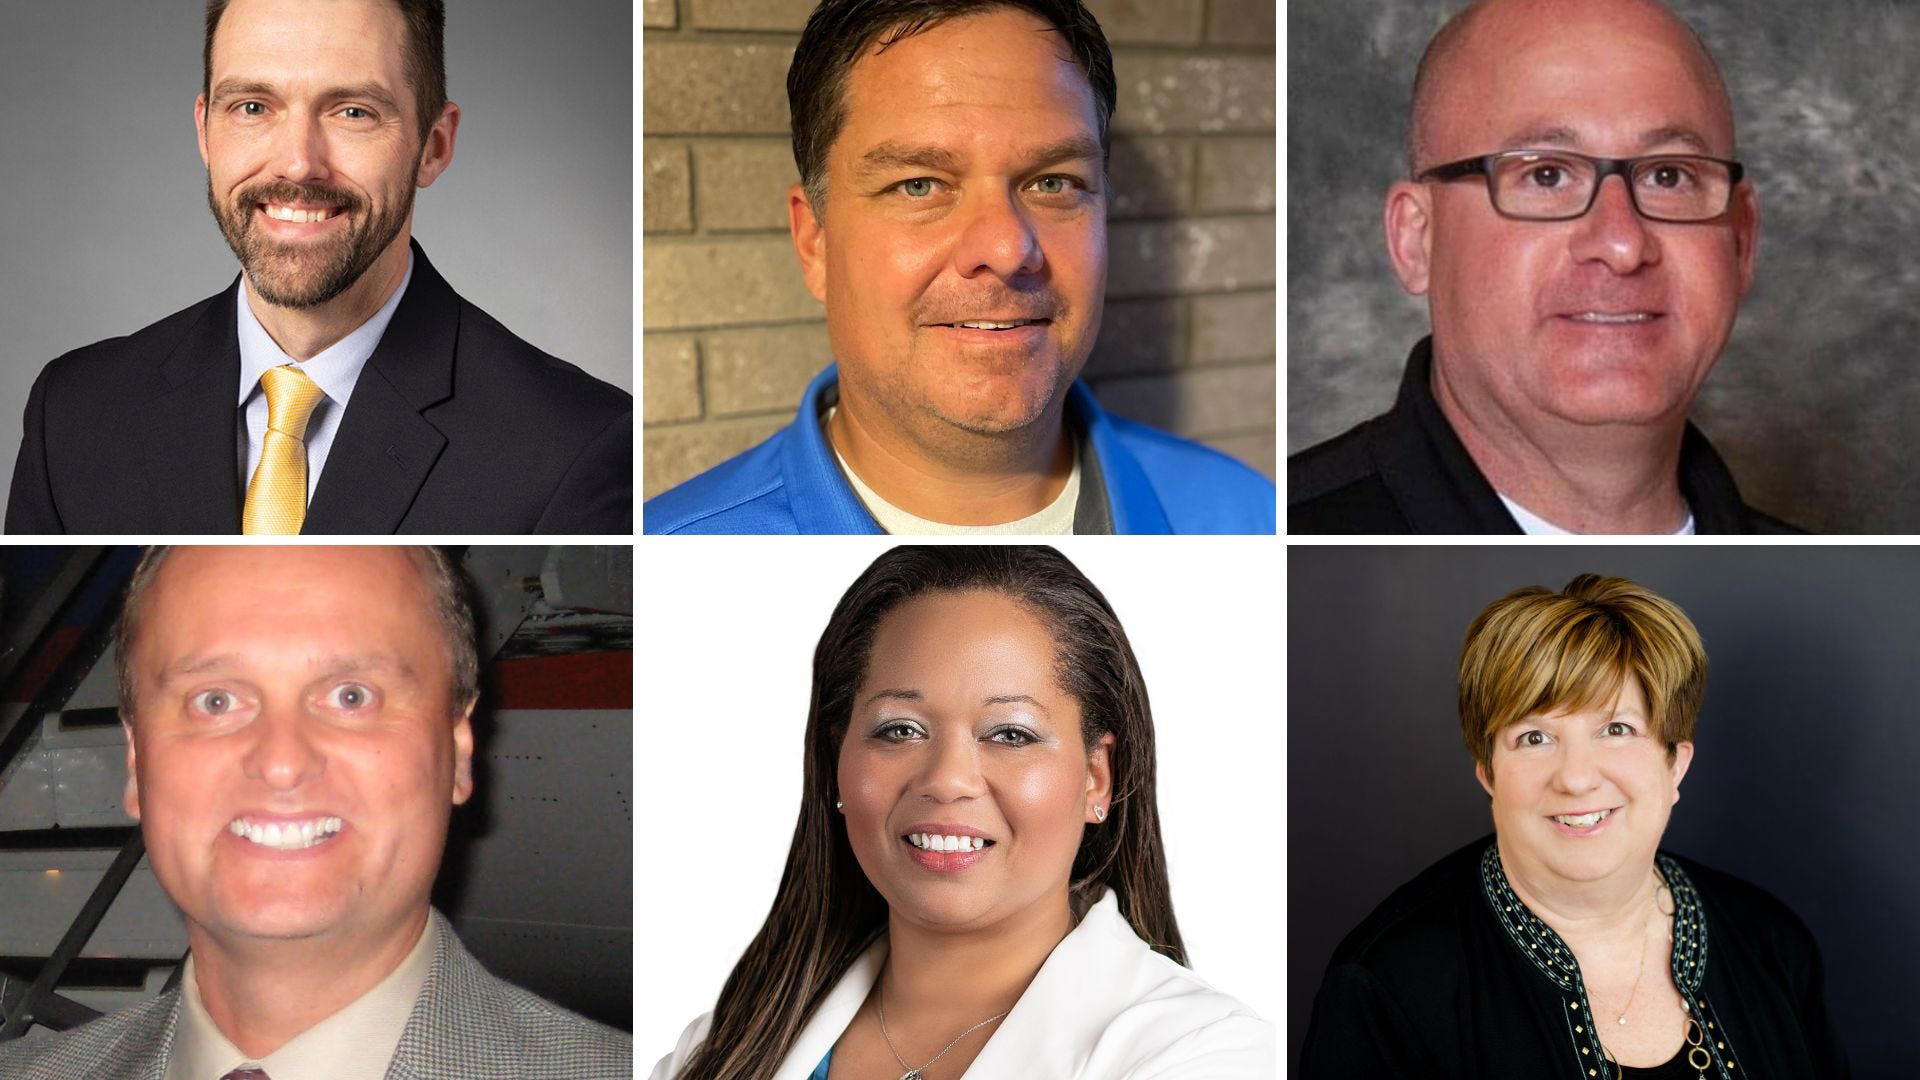 Meet the six candidates running for Southeast Polk School Board in 2023